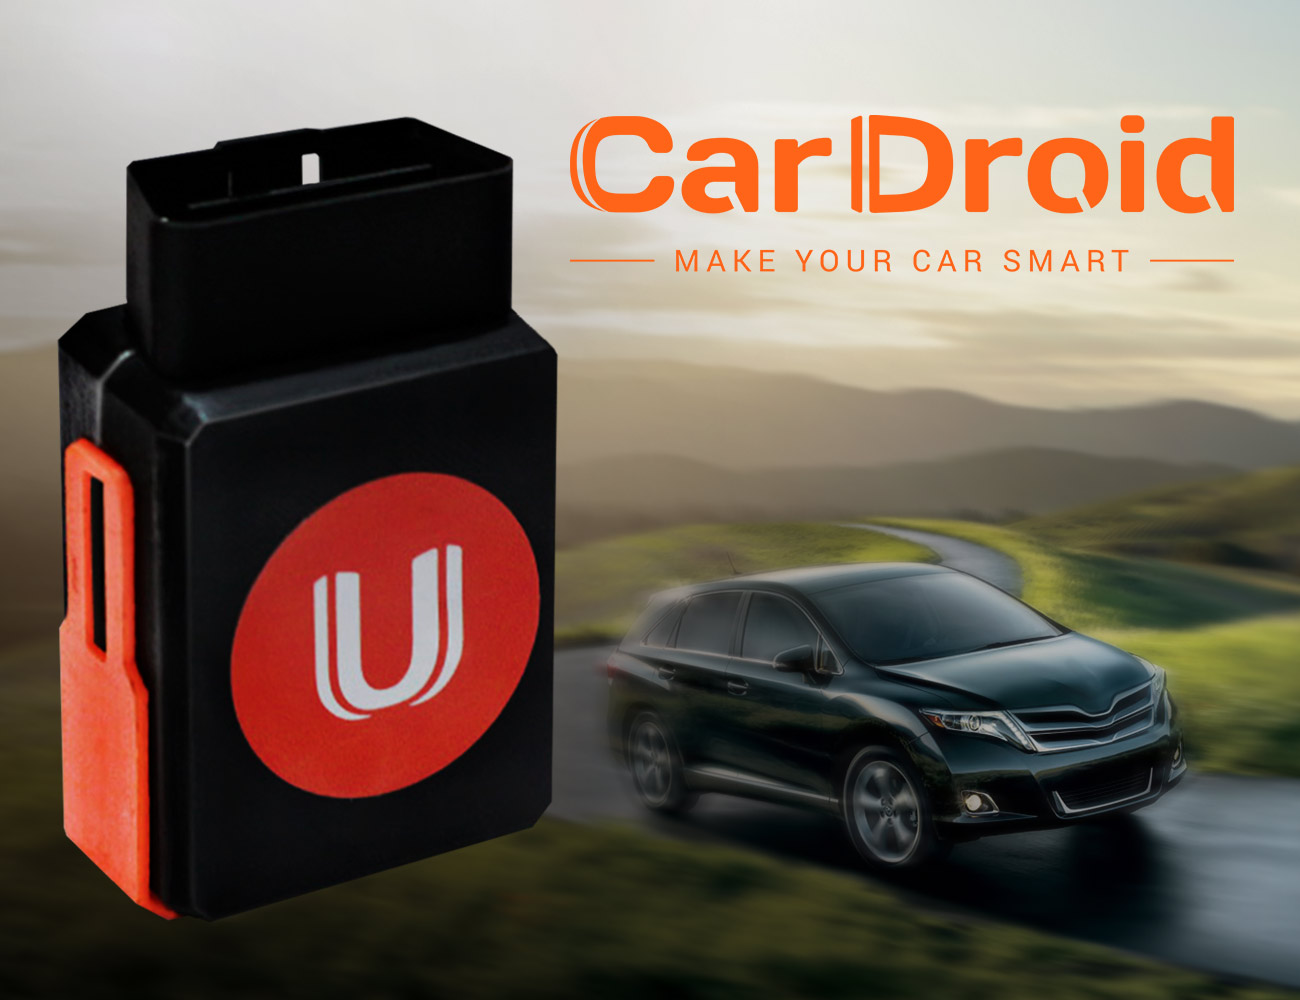 cardroid-first-android-vehicle-monitoring-device-02.jpg